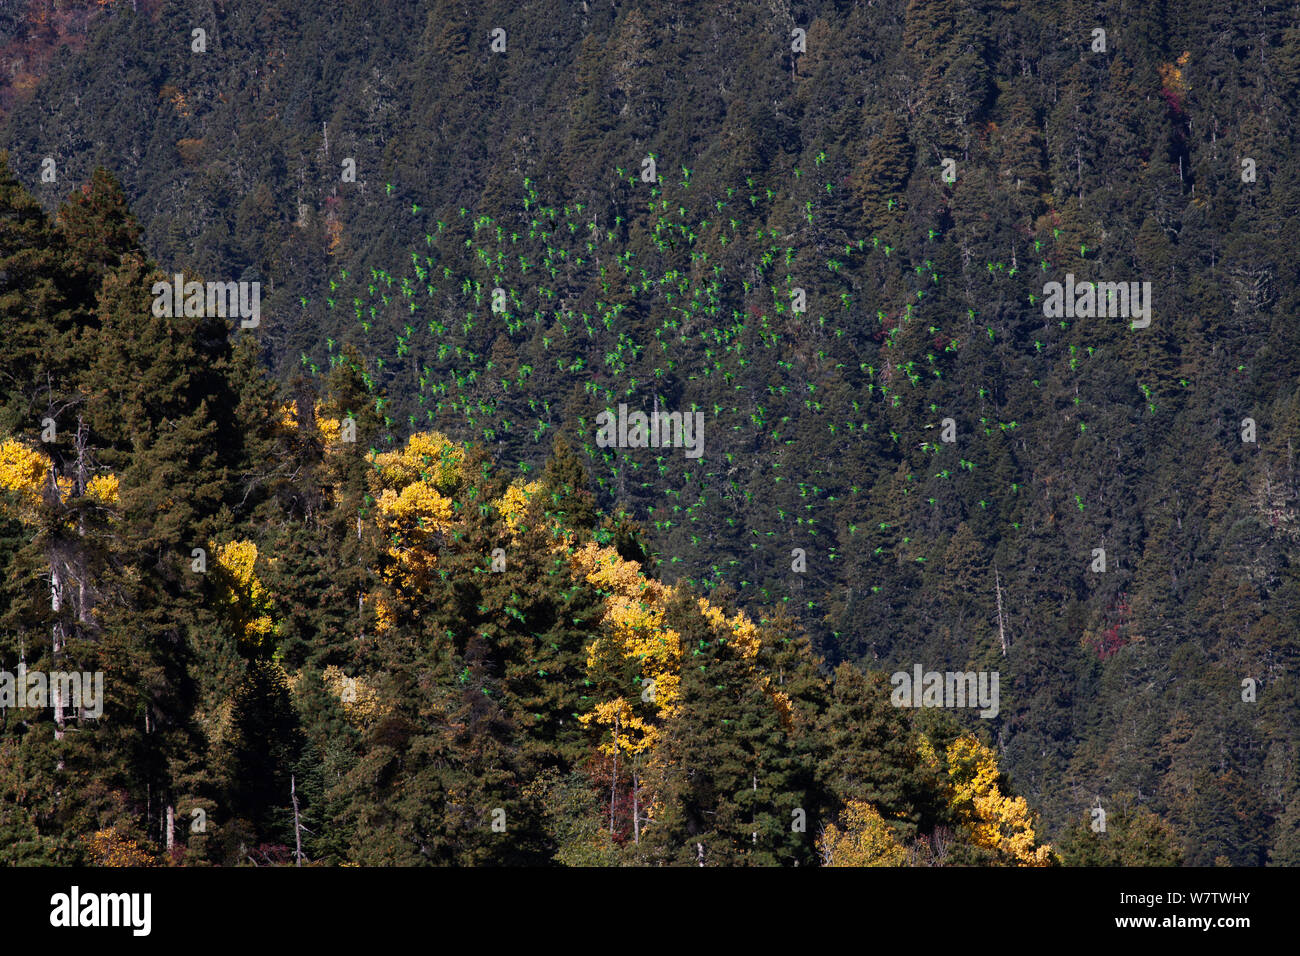 Derby's parakeet (Psittacula derbiana) flock in flight over forest, Meili Snow Mountain National Park, Yunnan Province, China, October. Stock Photo